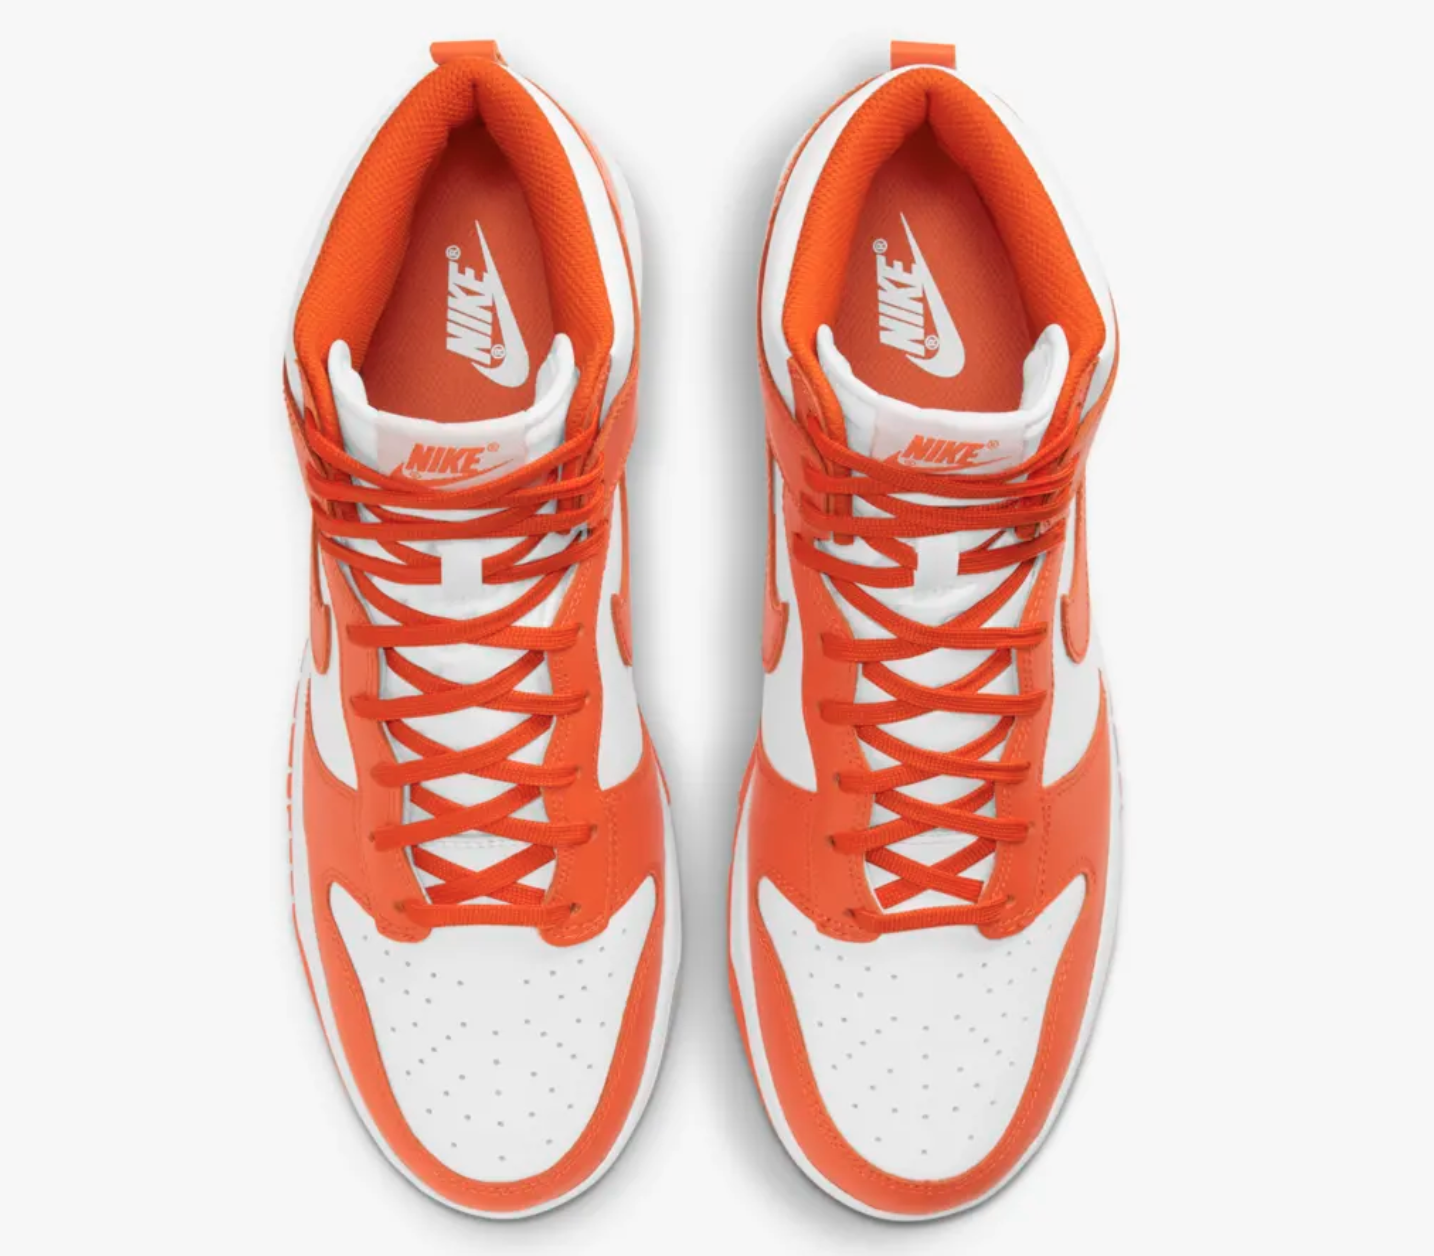 orange and teal nike shoes